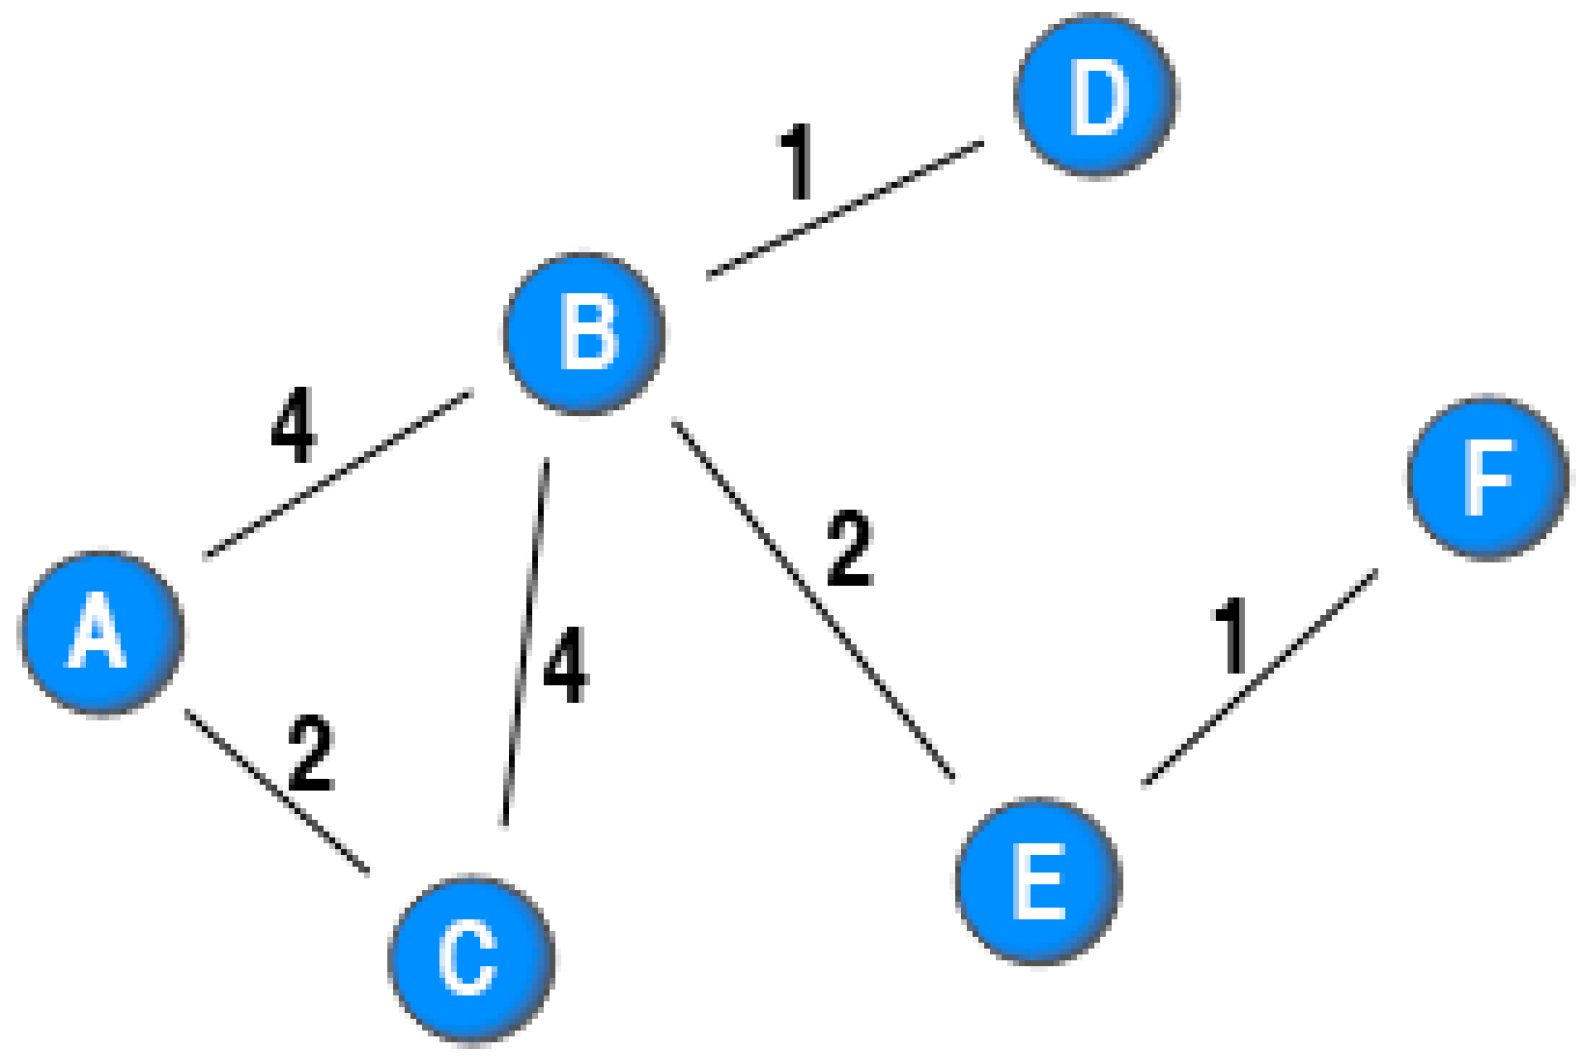 a synthetic data generator for online social network graphs